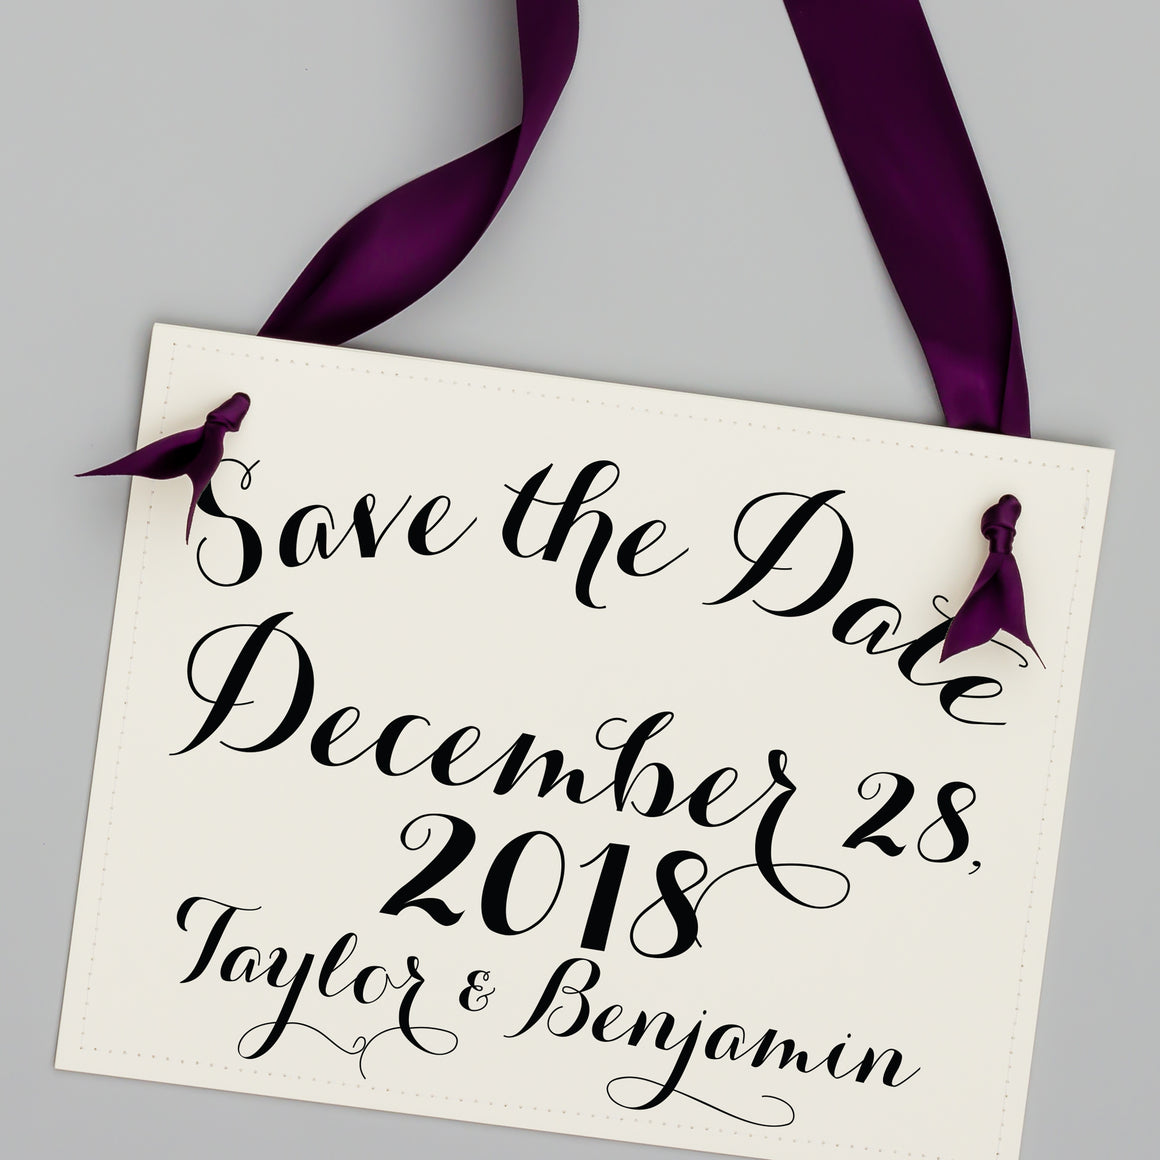 Save the date sign